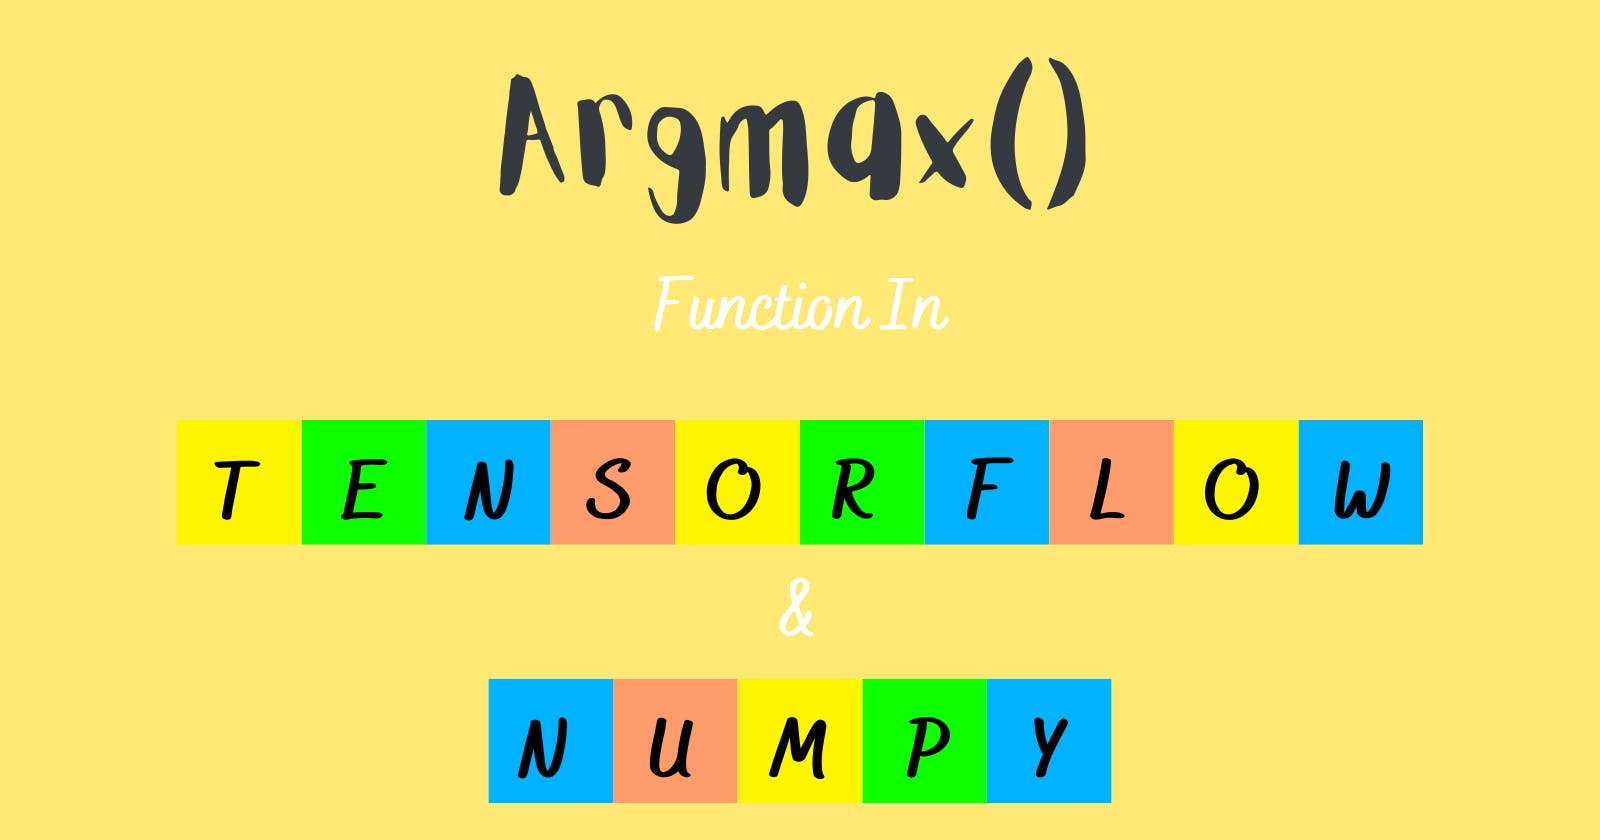 numpy.argmax() and tensorflow.argmax() - Are They Same